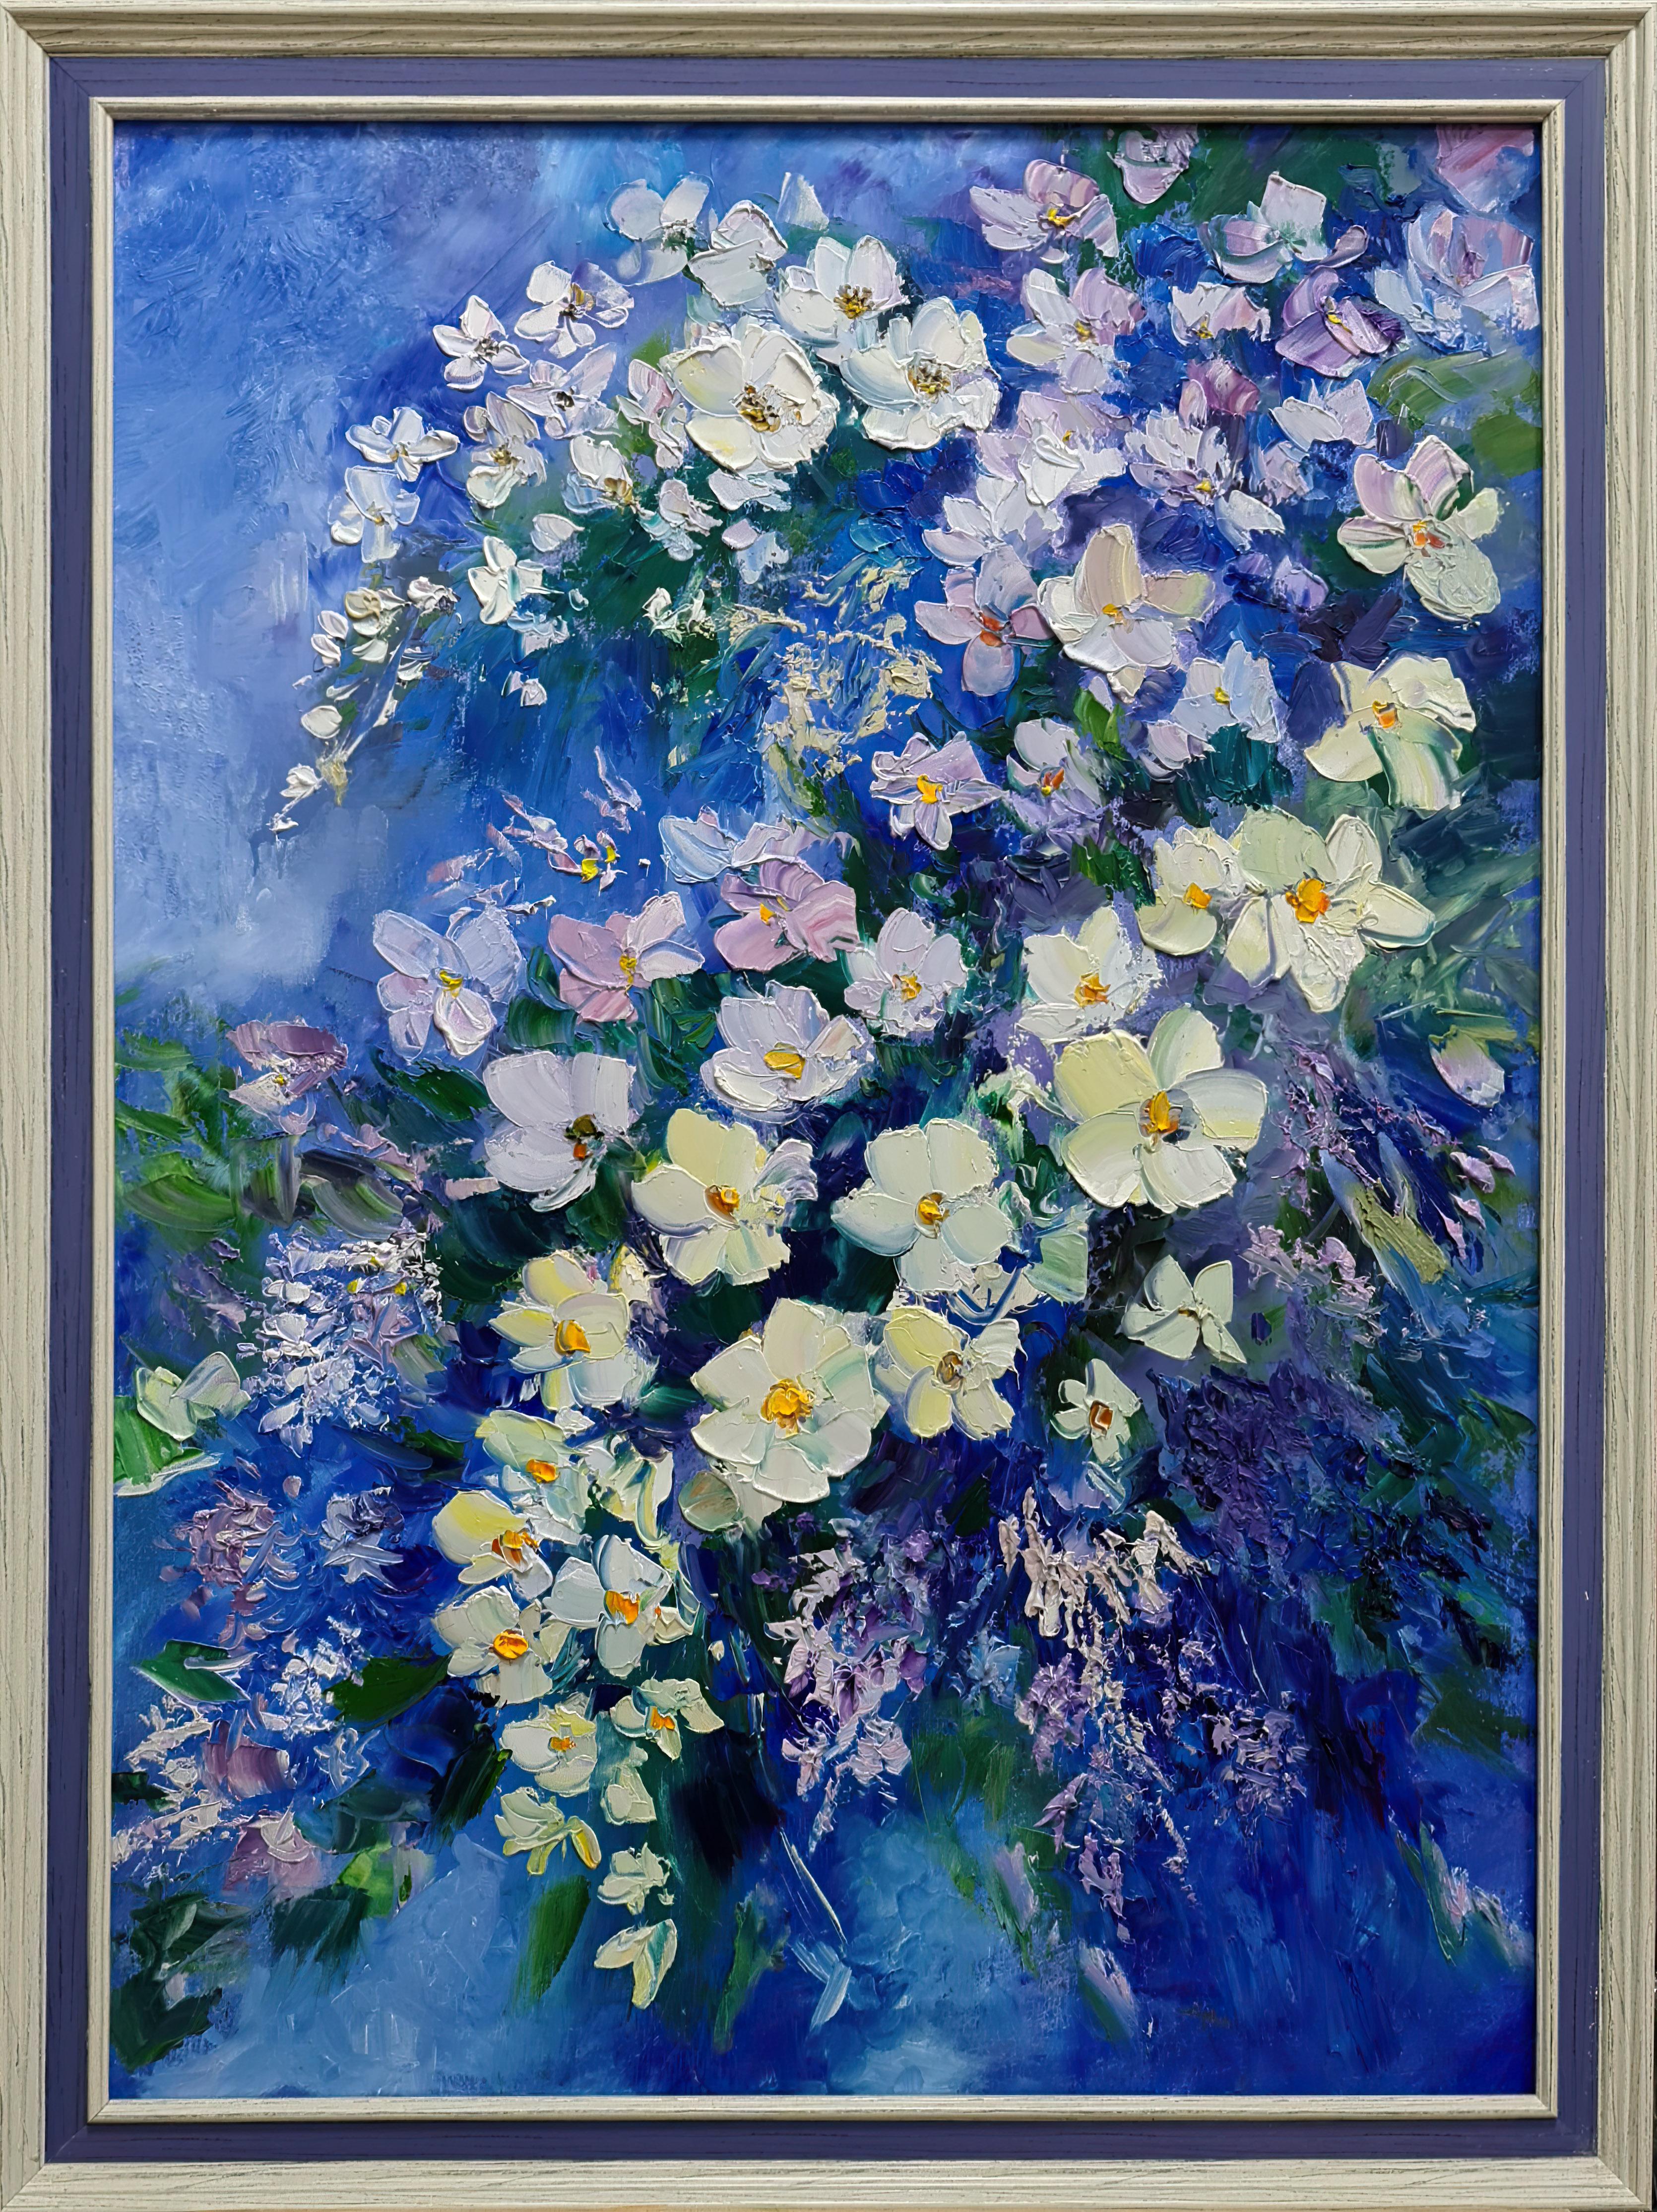 The paintings are drawn with oil on the canvas.
A summer landscape with white jasmine flowers. Clusters of flowers. The painting is made in the style of painting in large strokes. It's expressive and very lively. I used my favorite colors, purple